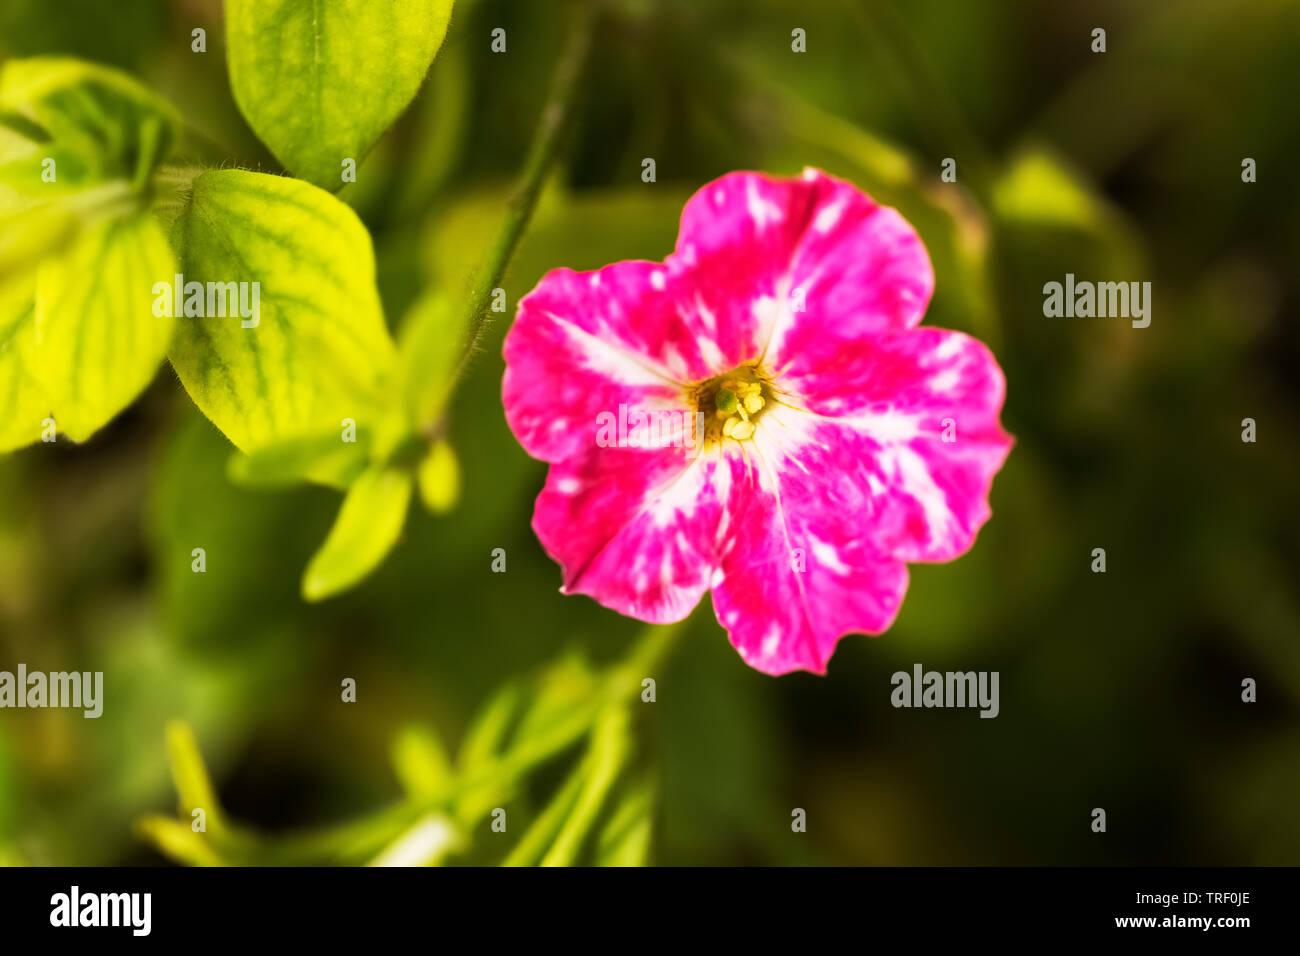 Purple color of Geranium Flower on Green Background. Stock Photo